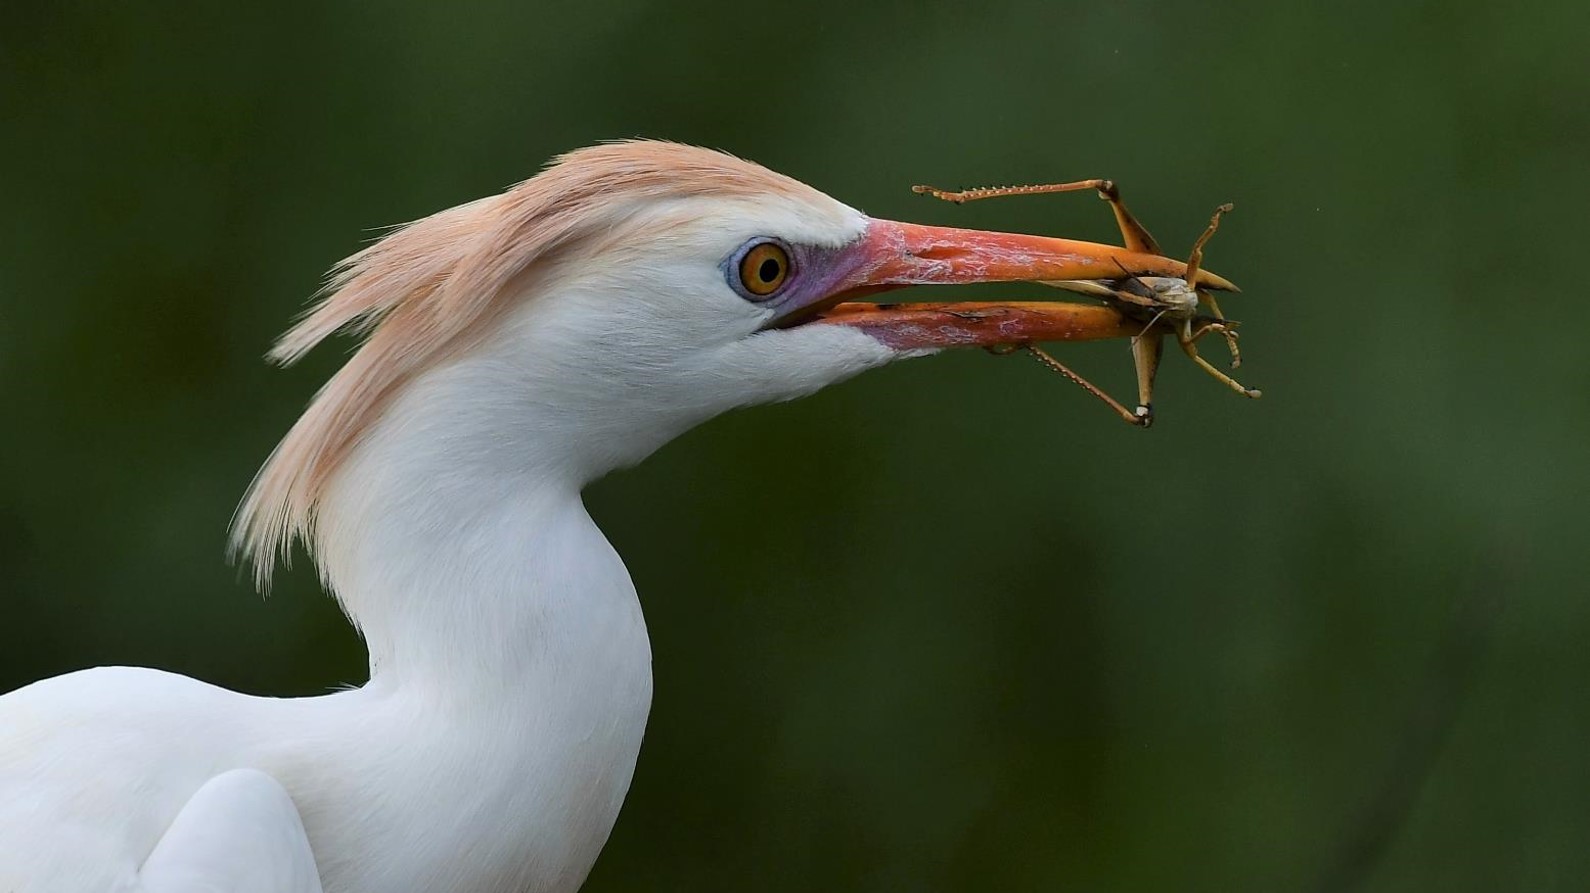 "I Caught Ya! Now, What’ll I Do with Ya? Cattle Egret with Grasshopper" Novice Honorable Mention: Jan Pewsey, Ocoee